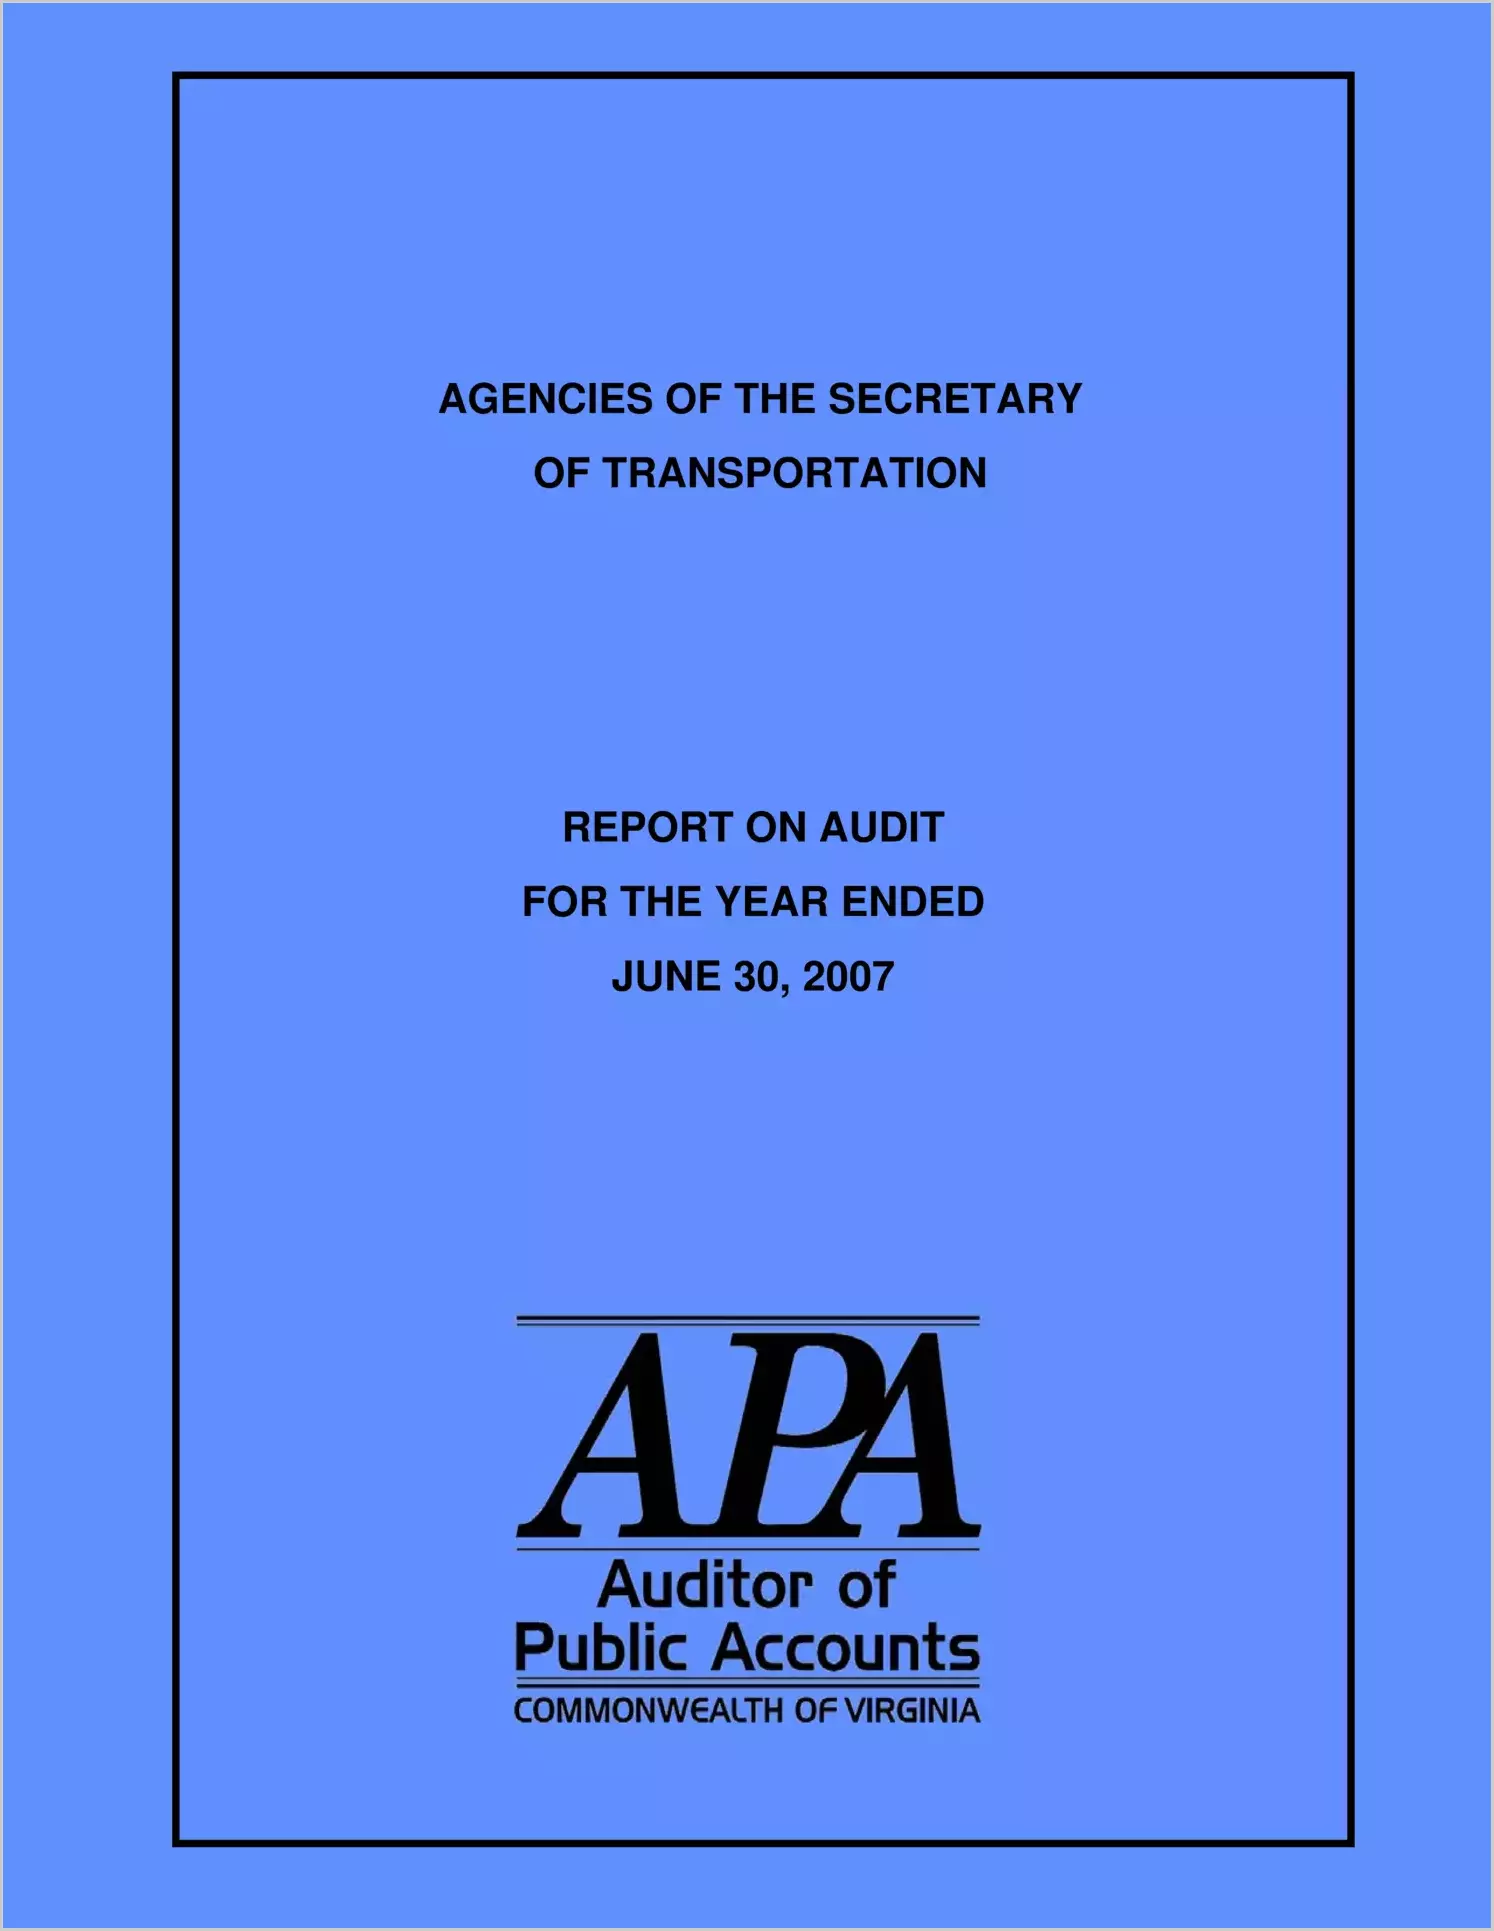 Agencies of the Secretary of Transportation for the year ended June 30, 2007